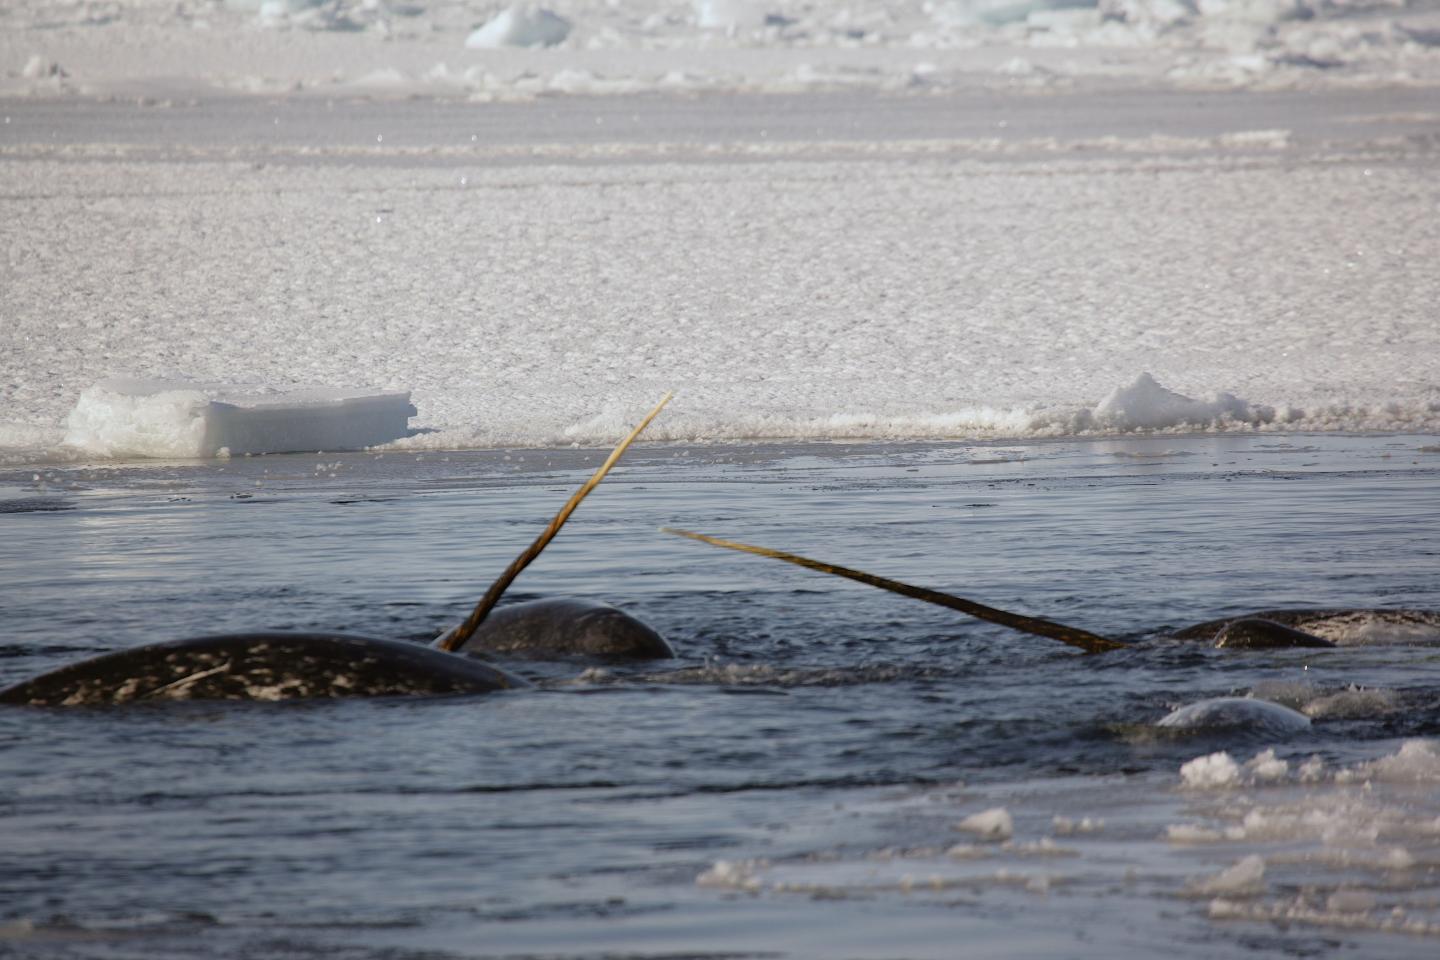 Freeze and Flee: The Costly 'Escape' Response of Narwhal